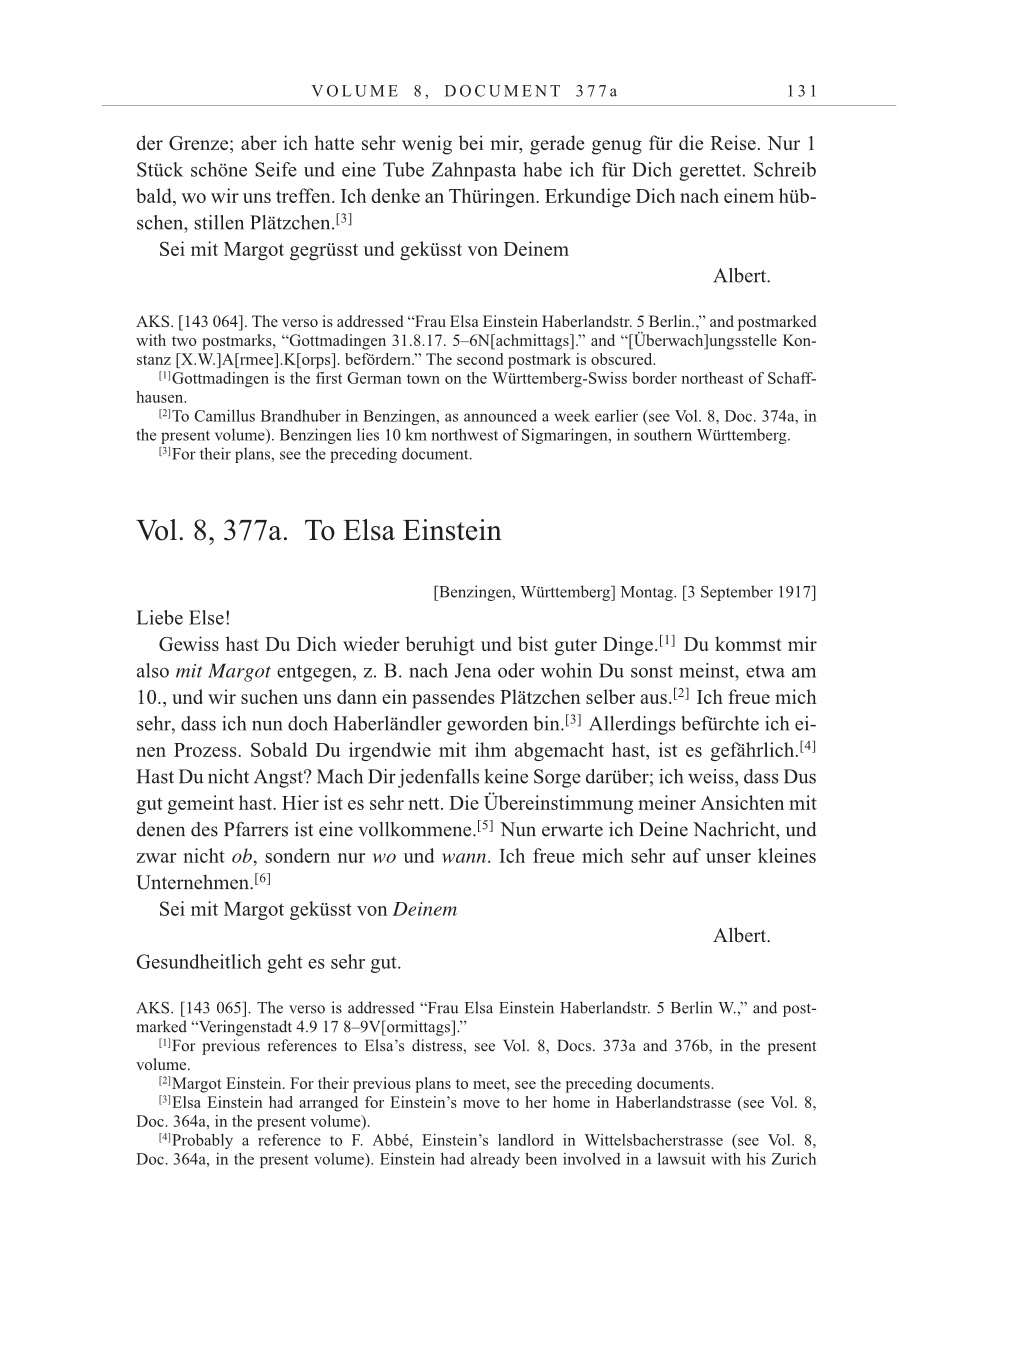 Volume 10: The Berlin Years: Correspondence May-December 1920 / Supplementary Correspondence 1909-1920 page 131